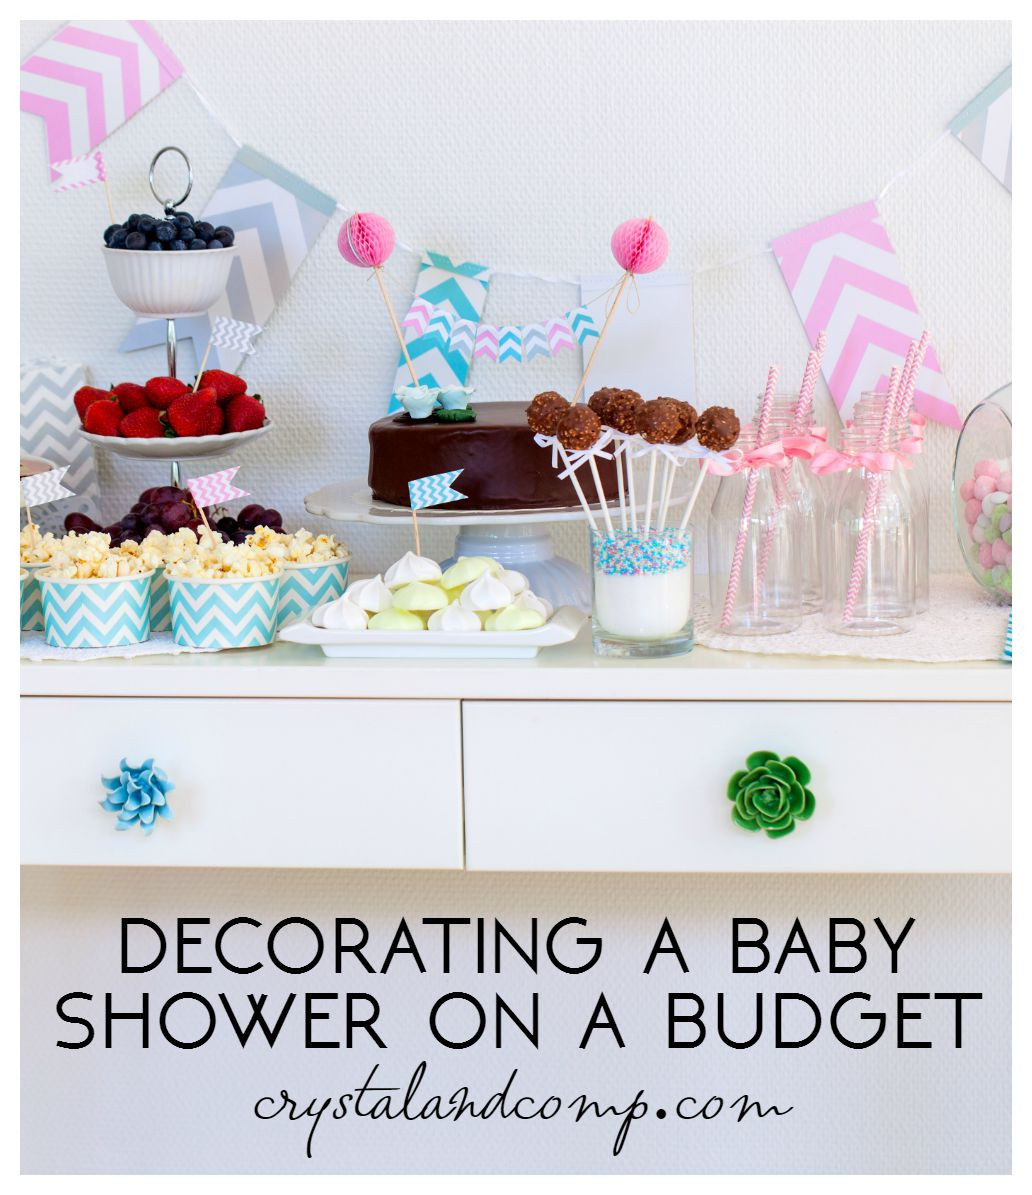 Baby Shower Decoration Ideas On A Budget
 Tips for Decorating a Baby Shower